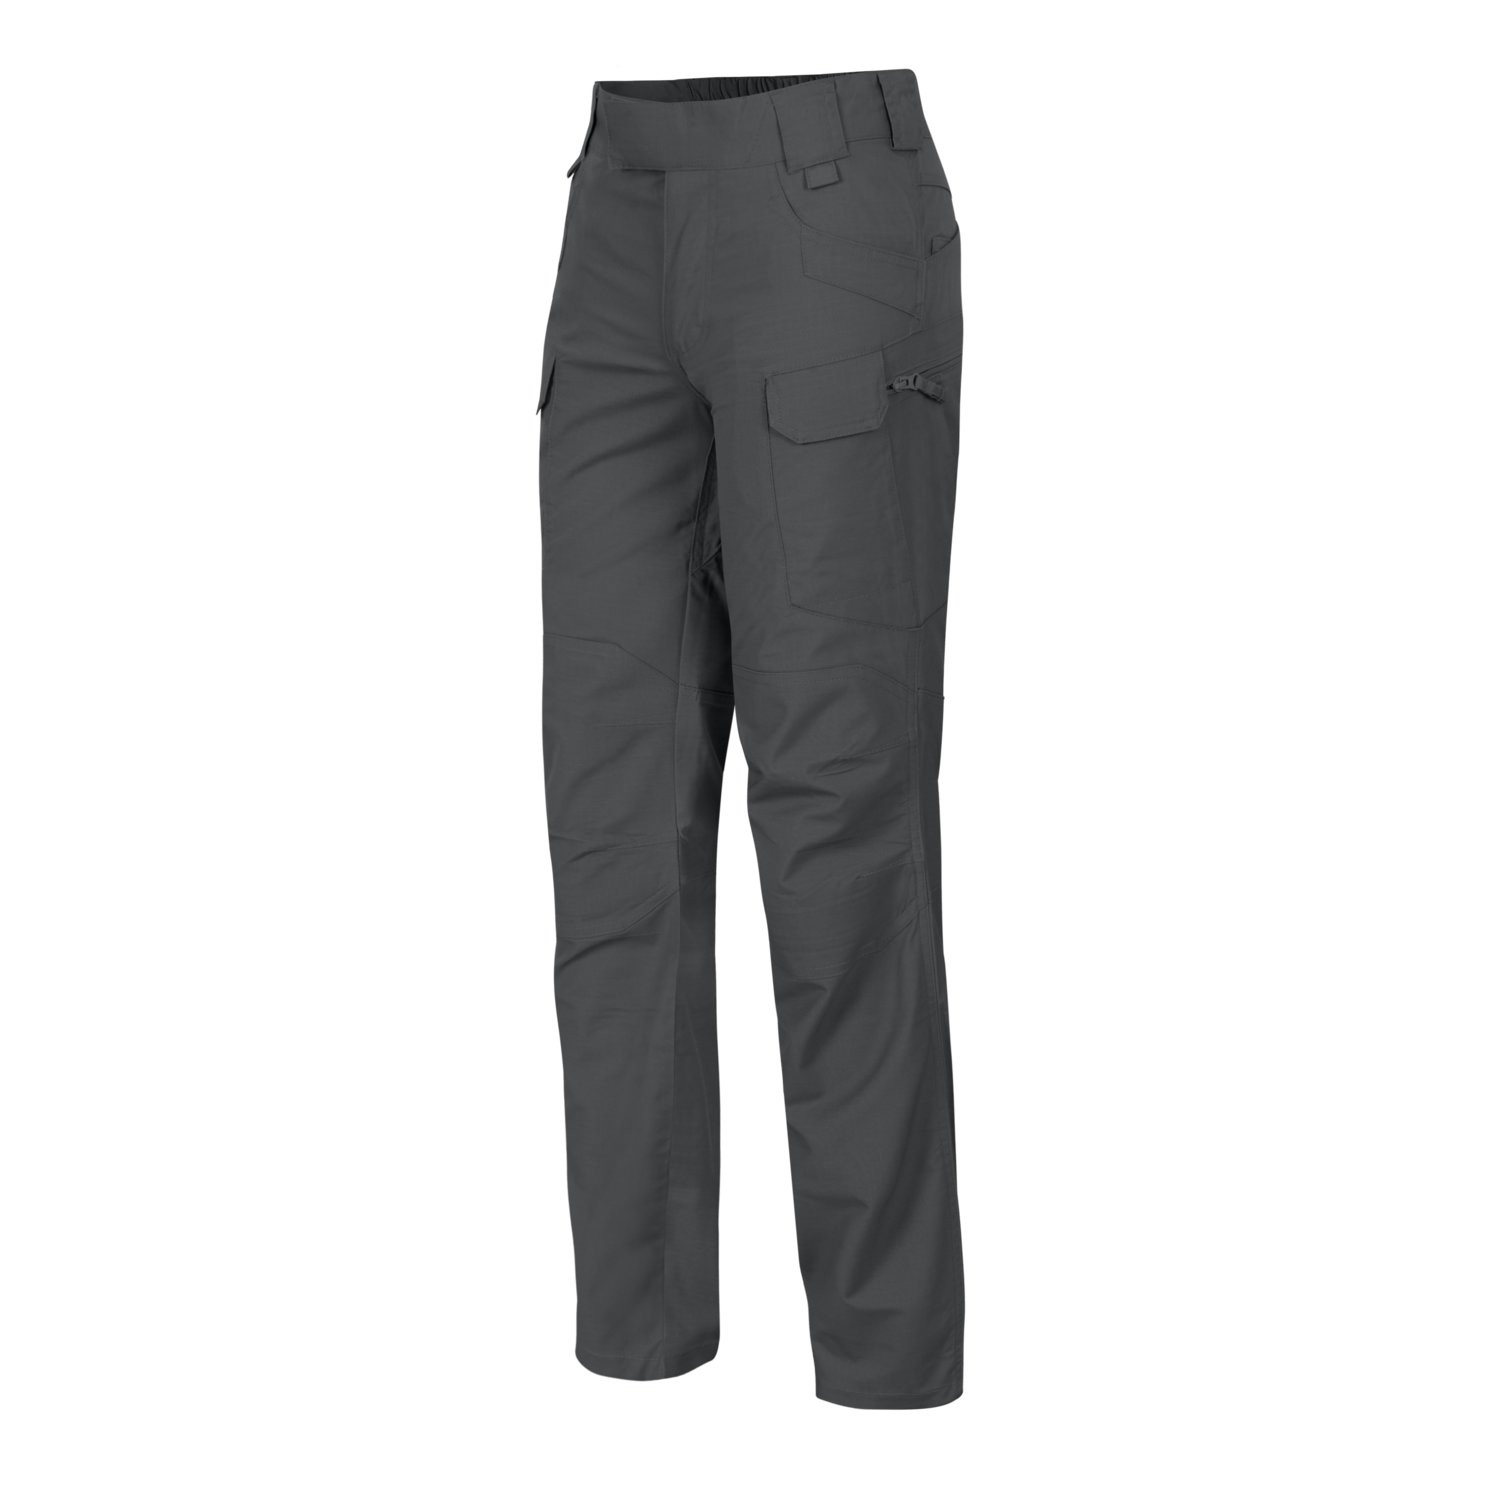 WOMENS UTP Resized® (Urban Tactical Pants®) - PolyCotton Ripstop ...